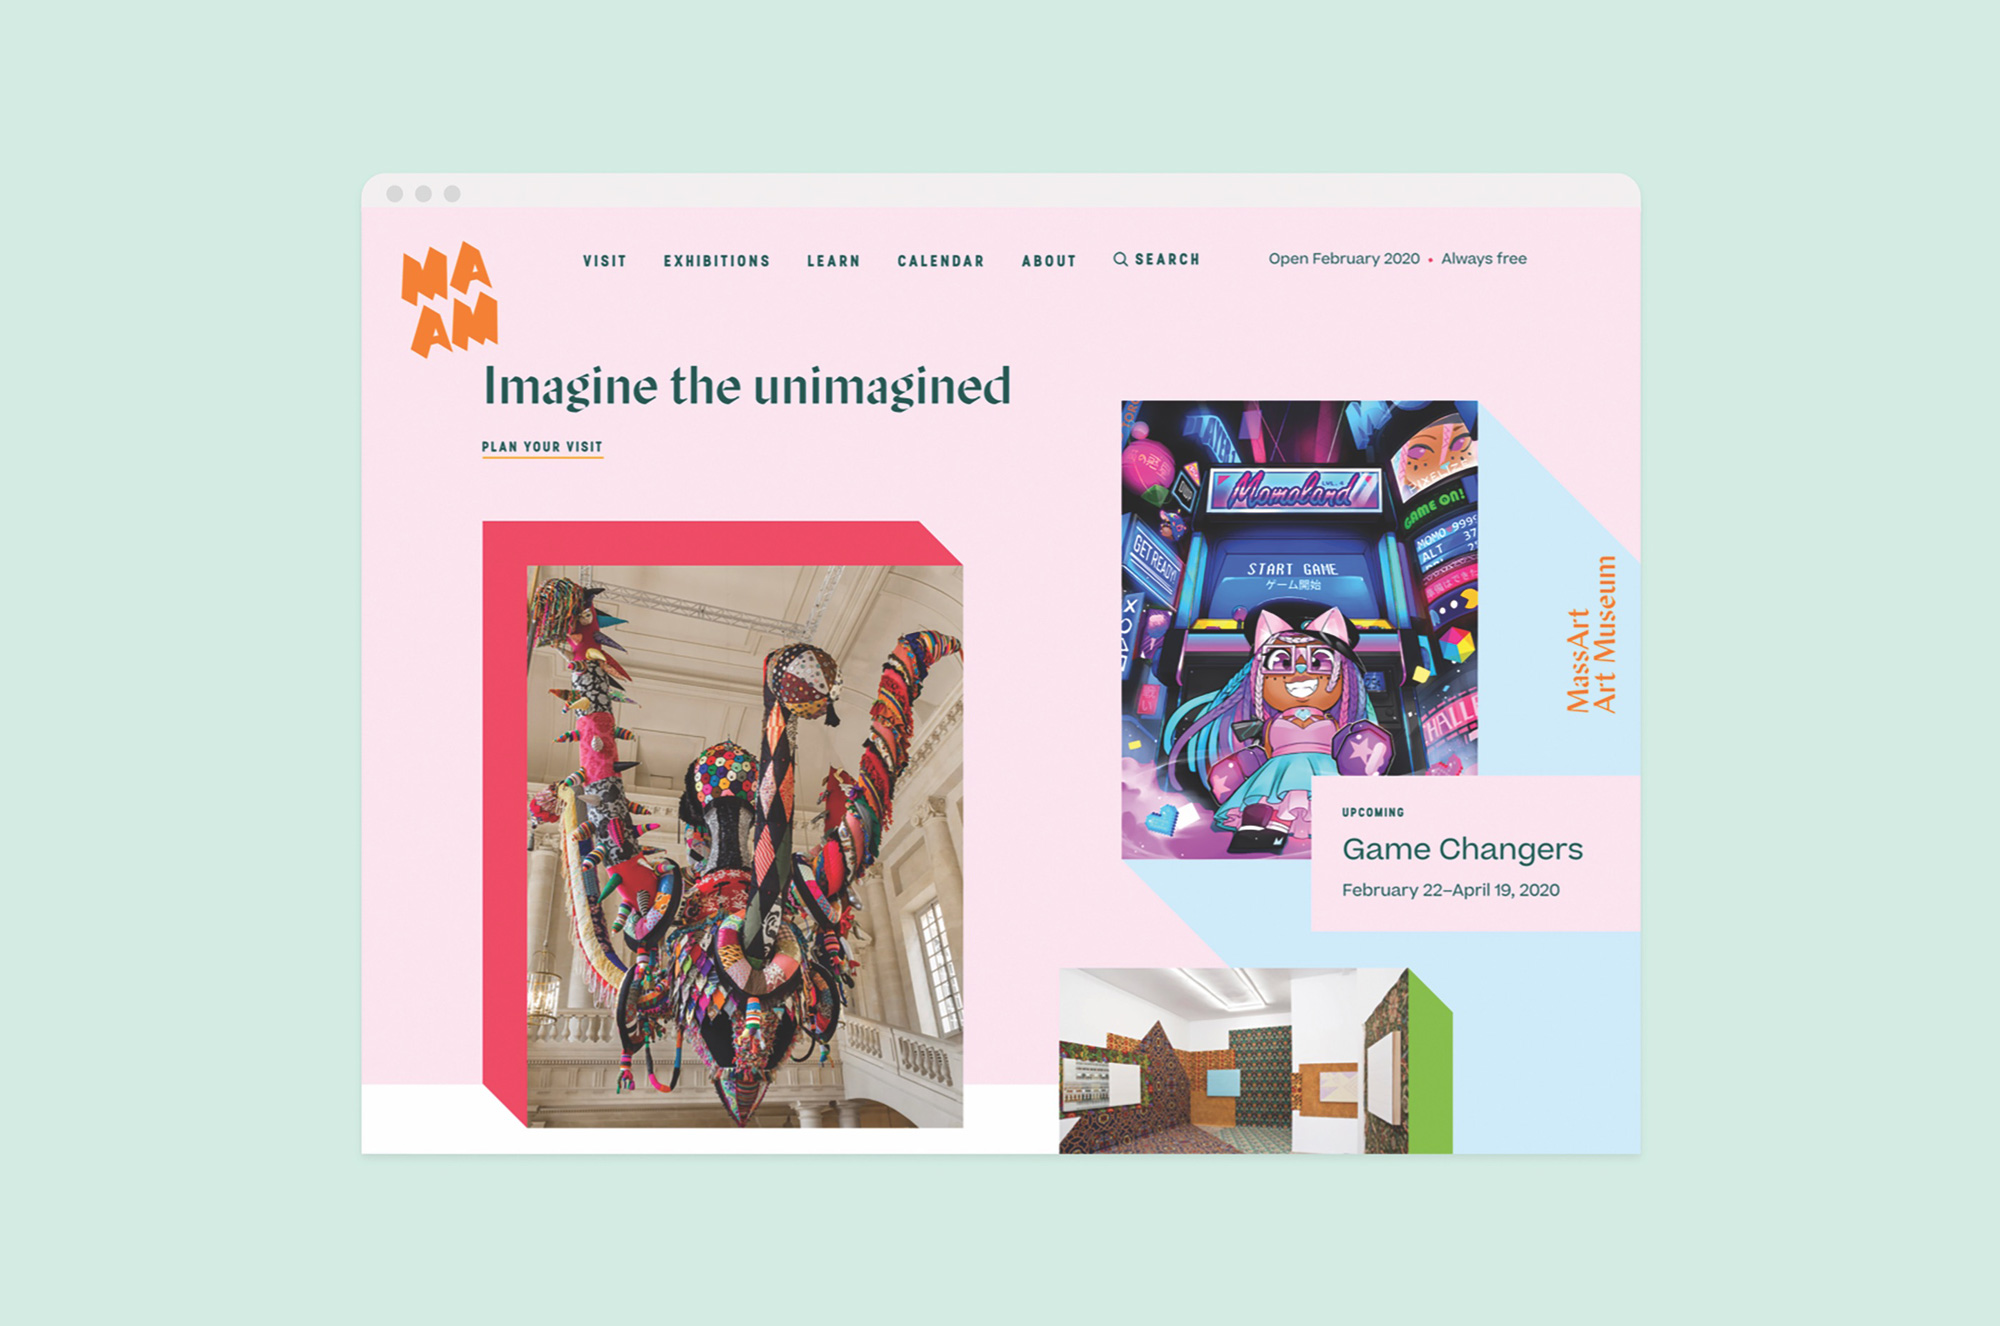 New Logo and Identity for MAAM by Moth Design